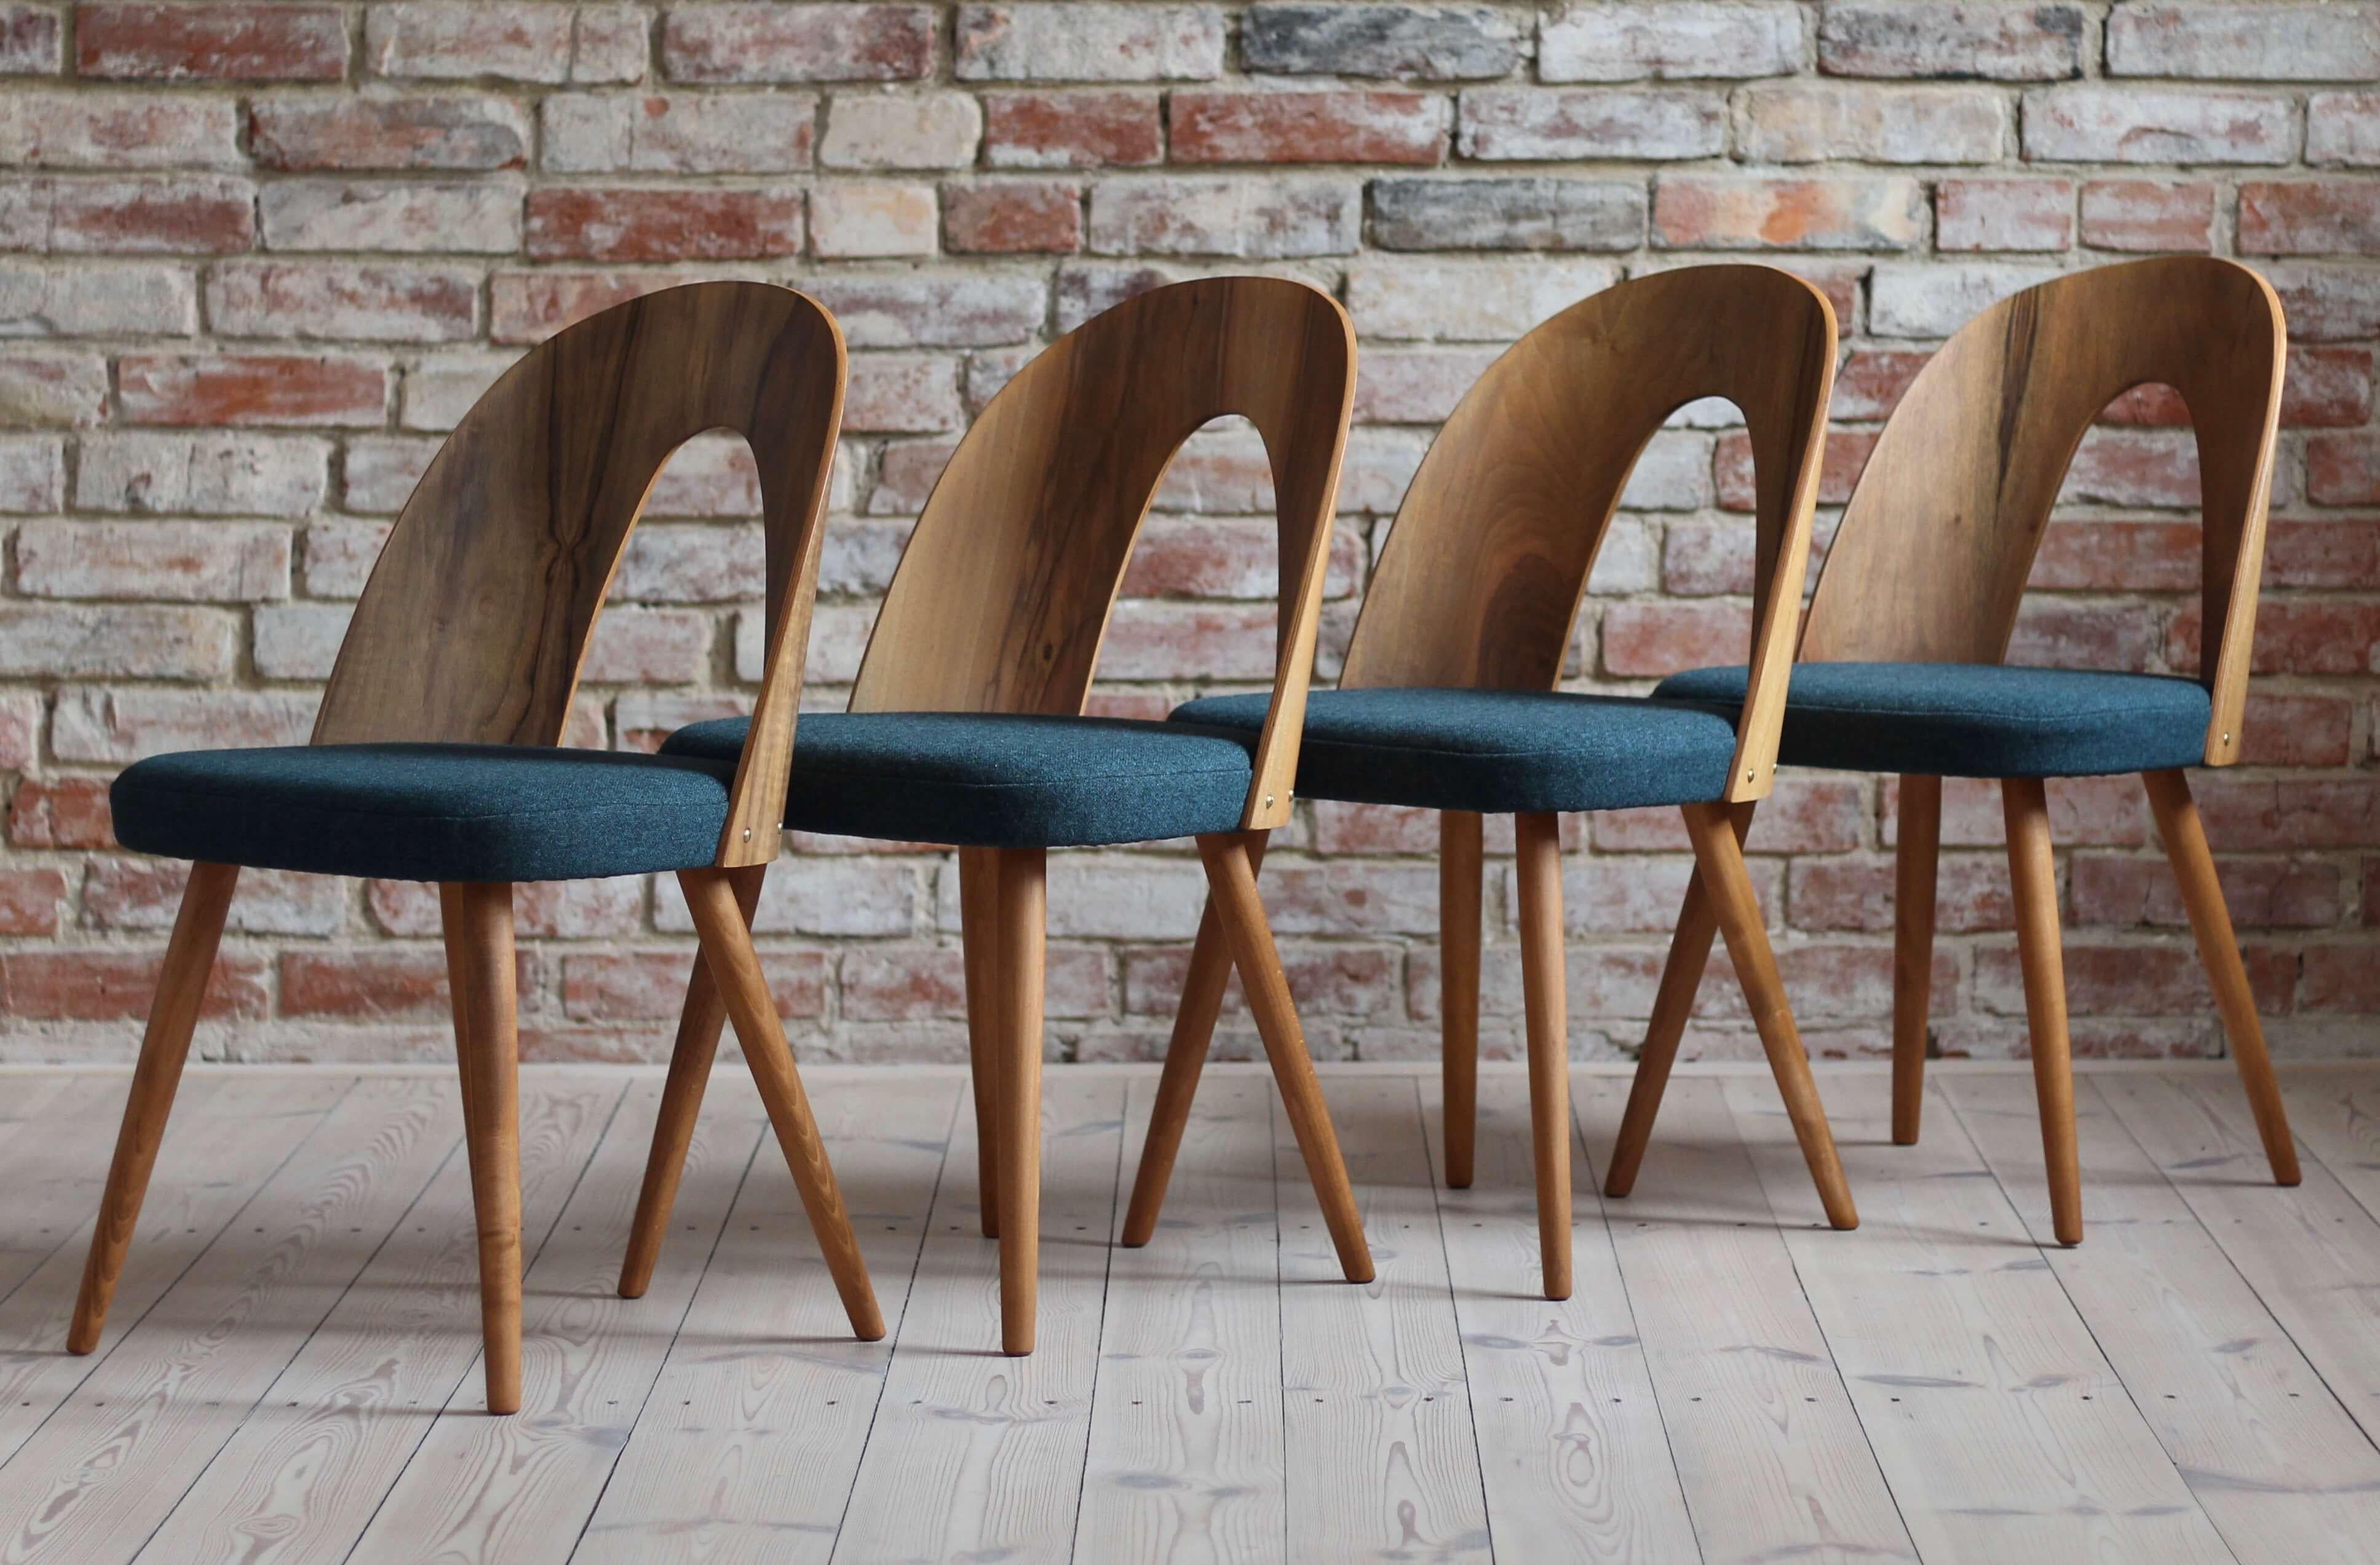 This set of four vintage dining chairs was designed by Czech designer Antonin Šuman in the 1960s. The chairs have been completely restored finished with high-quality oil that gave them beautiful and natural finish. The set is reupholstered with